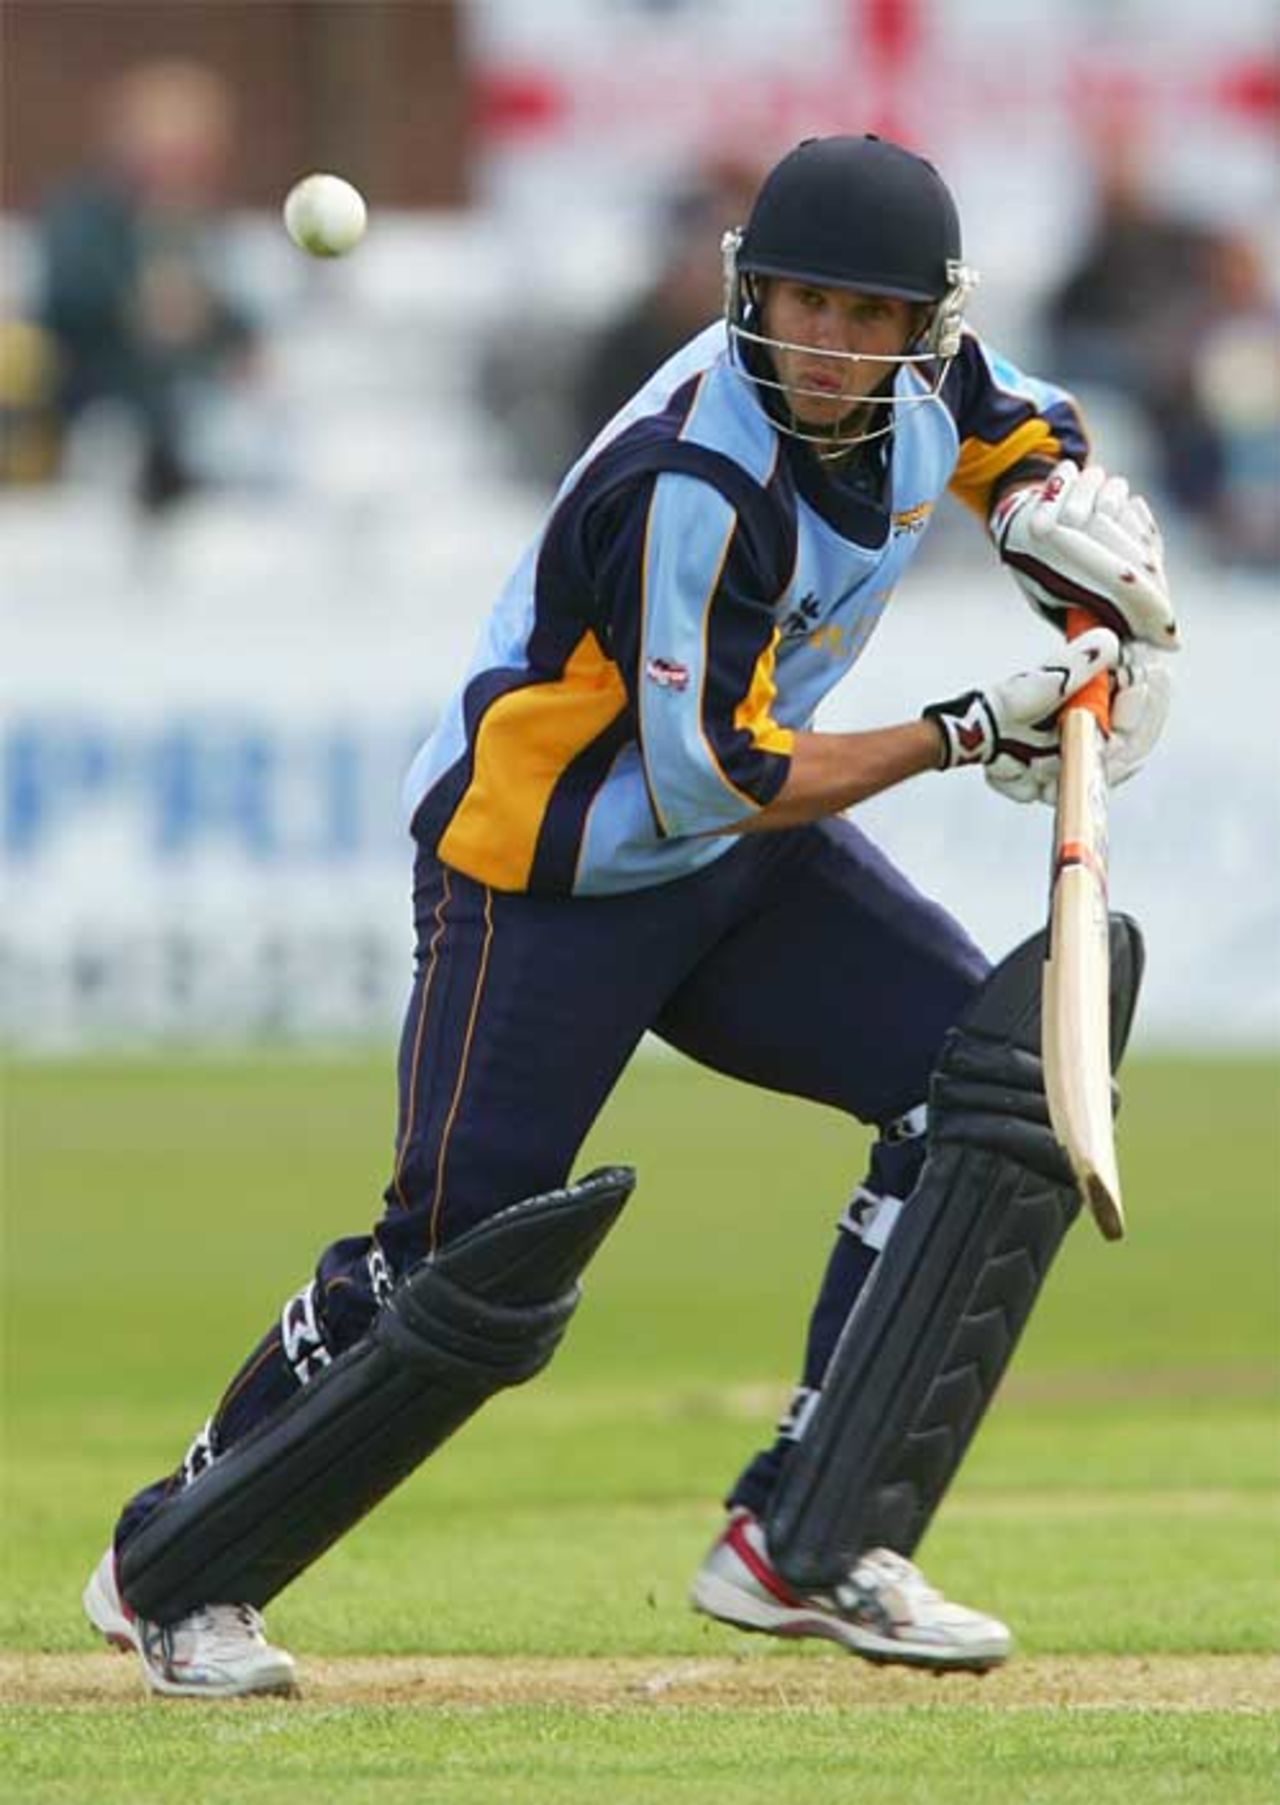 Greg Smith on his way to 56, Derbyshire v Warwiskhire, Friends Provident Trophy, May 7, 2007